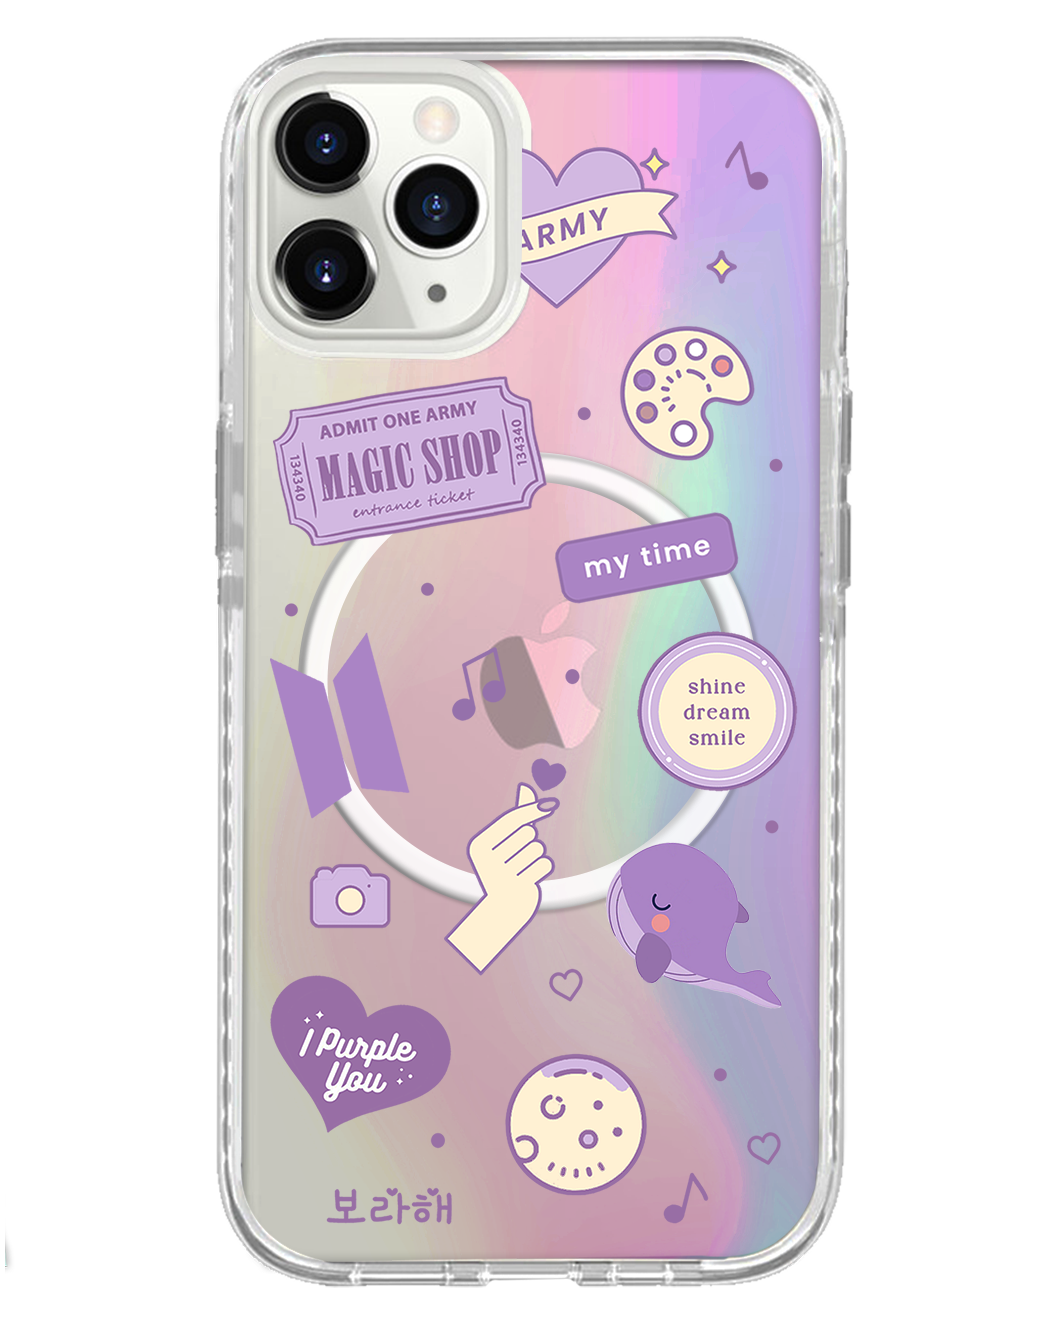 iPhone Rearguard Holo - BTS Sticker Pack